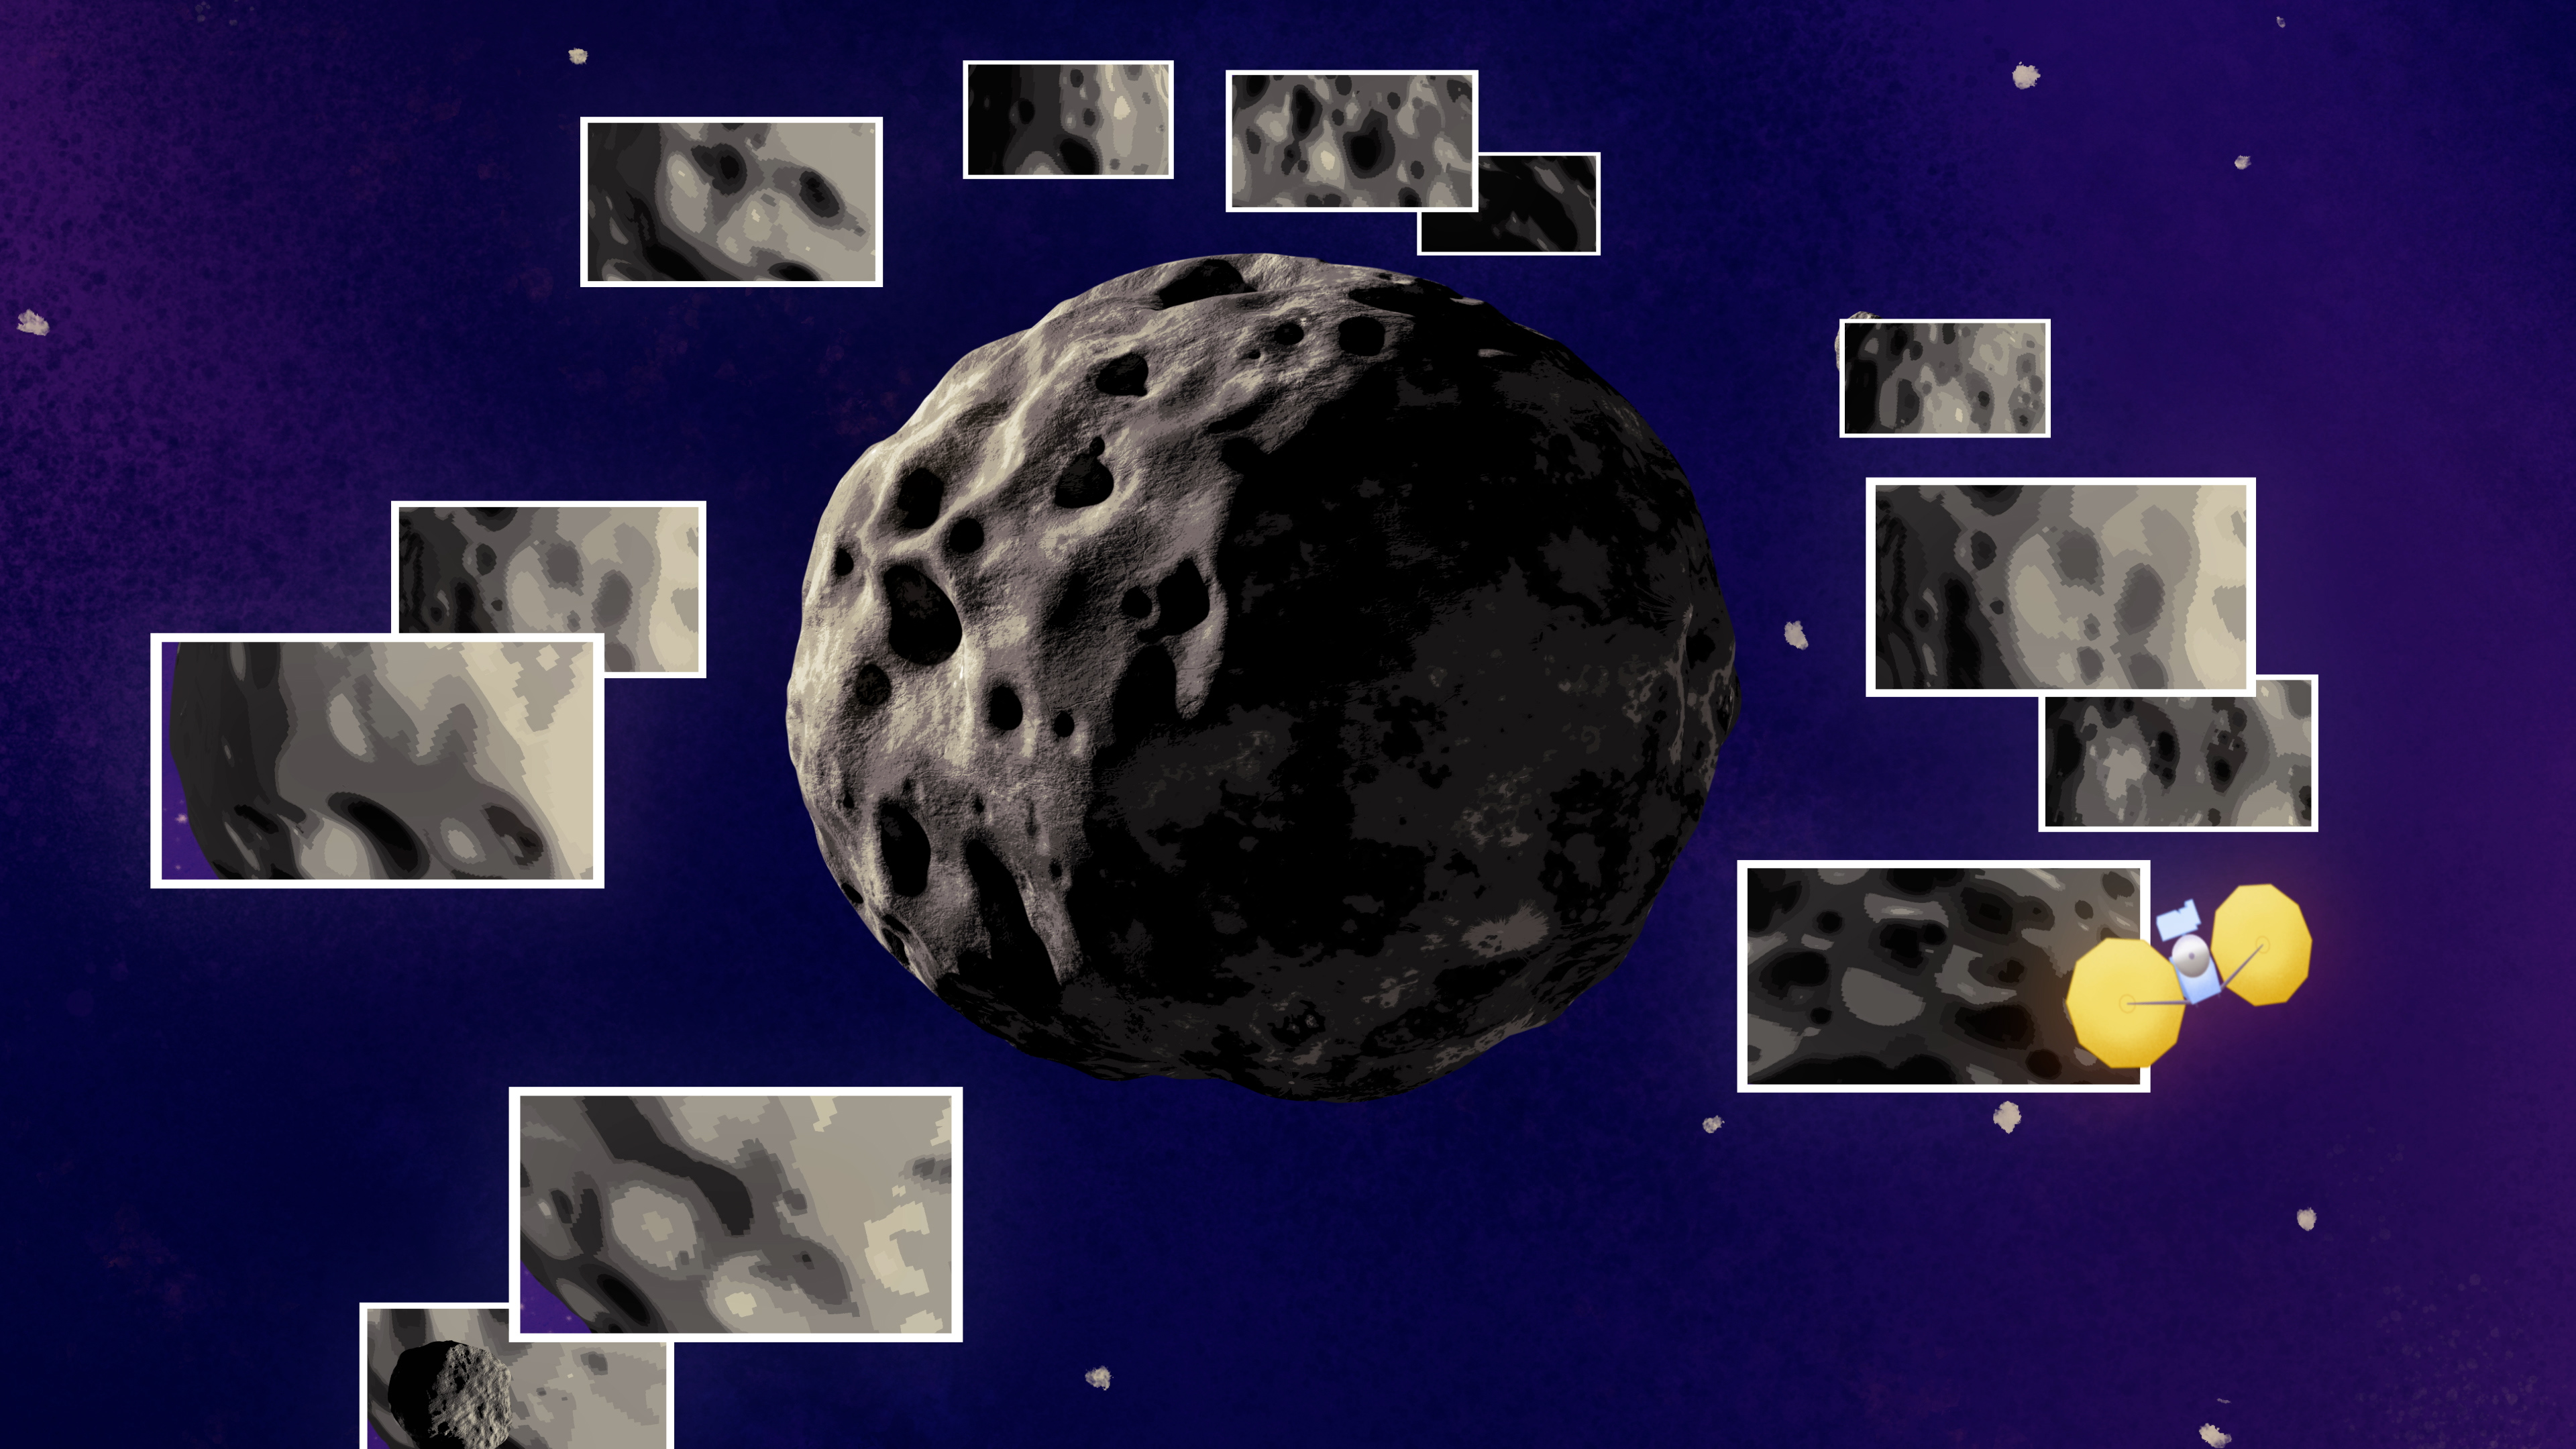 An animation showing a pockmarked asteroid, with zoomed in views captured in call-out boxes encircling the asteroid.